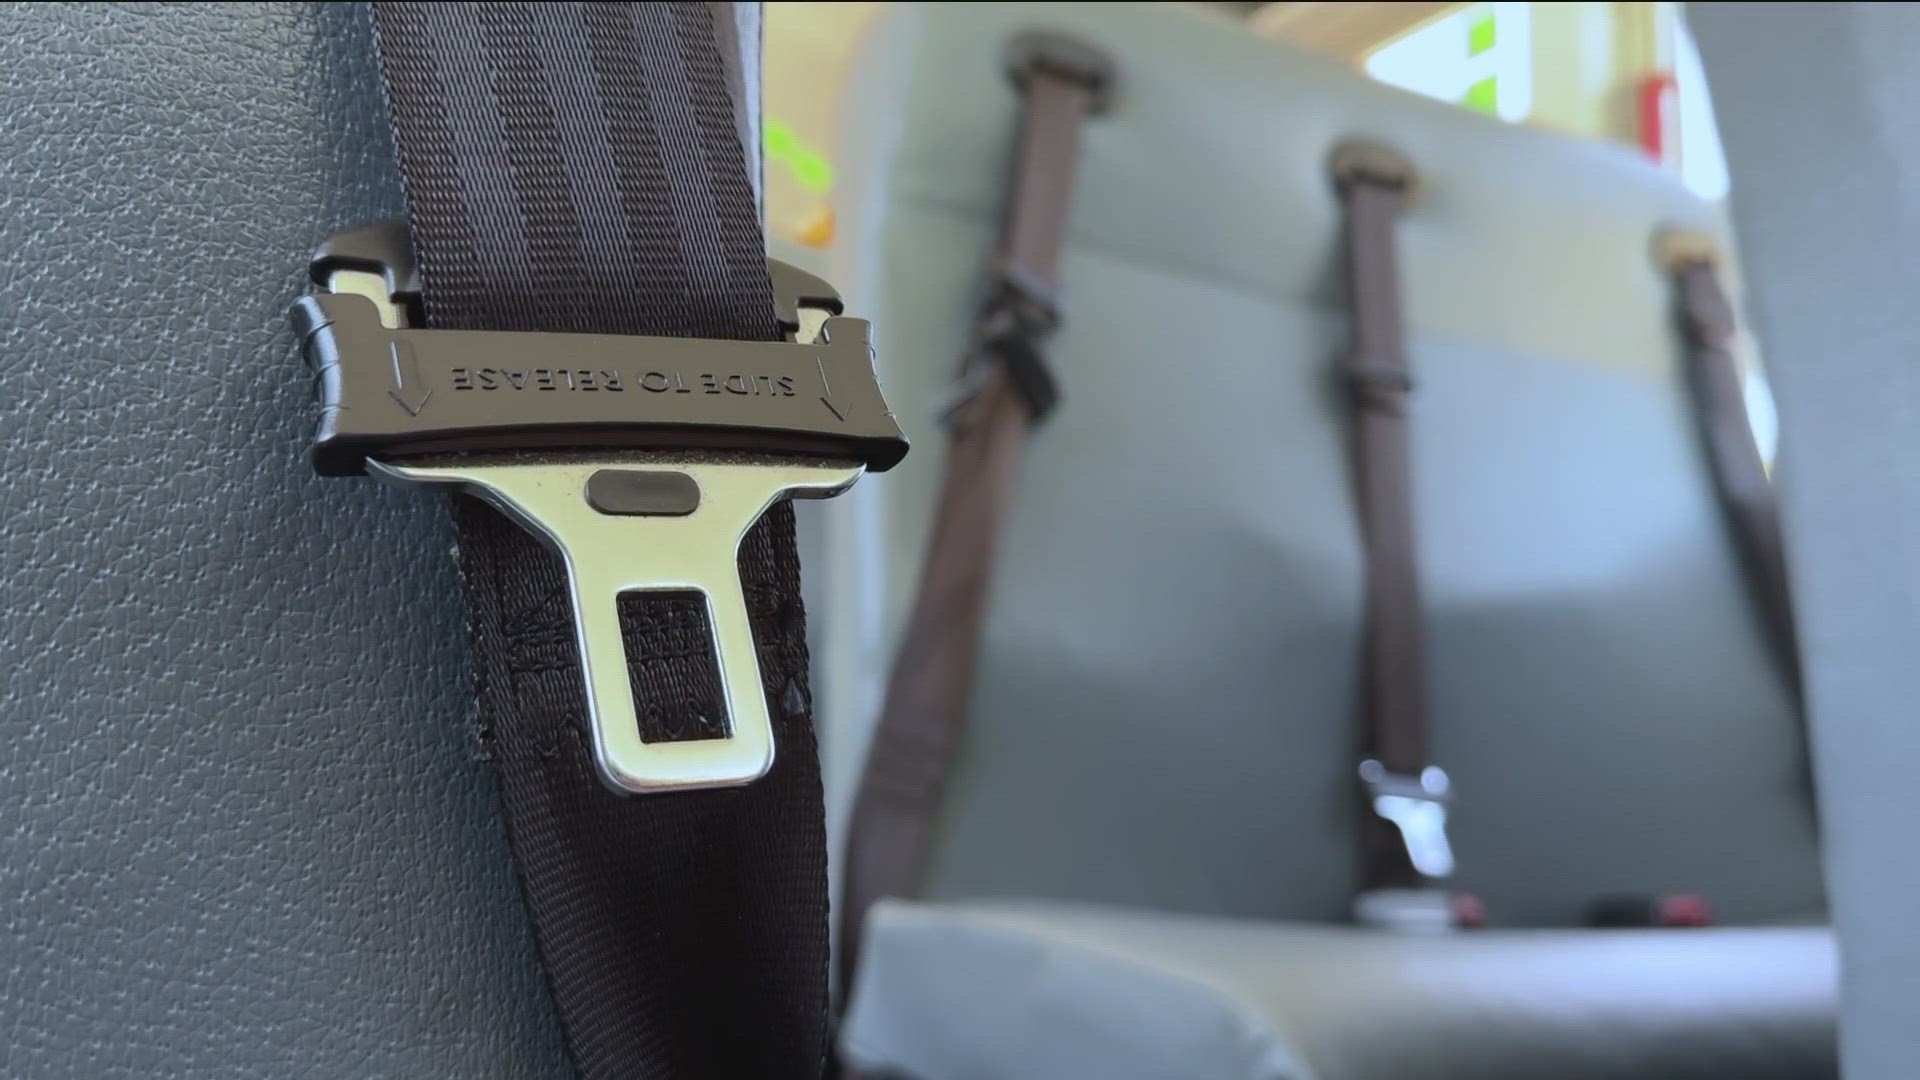 Following the deadly school bus crash in Bastrop County, seat belts are on many Texas parents' minds. KVUE's Jessica Cha checked with local school districts about th